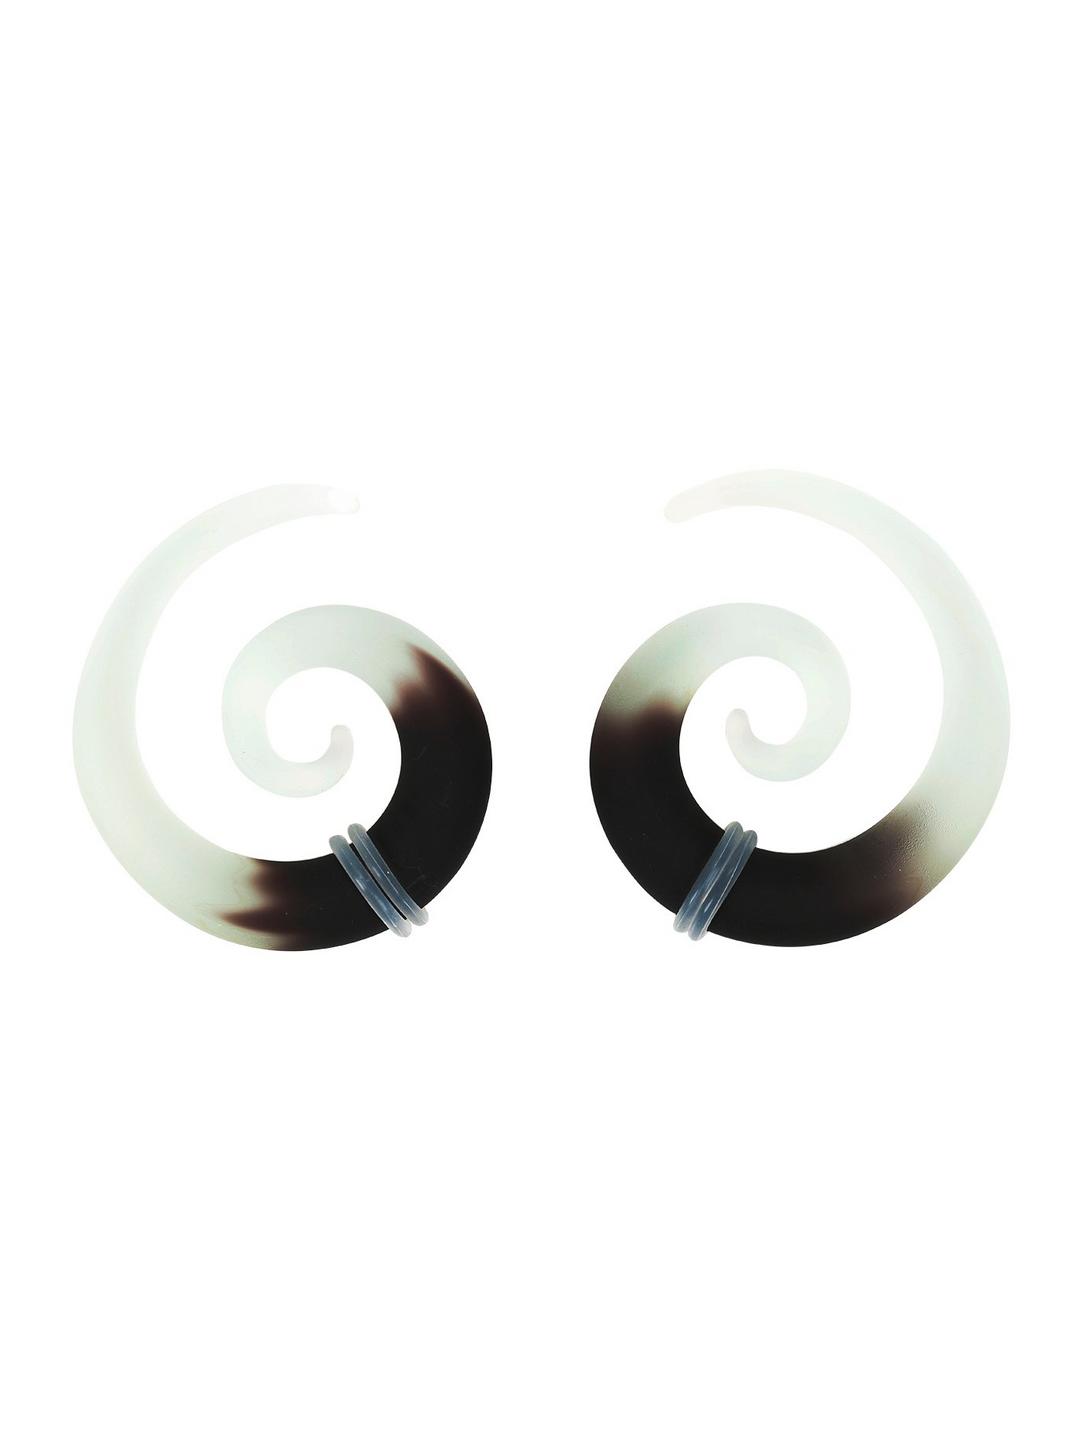 Black Frosted Glass Spiral Pincher 2 Pack, MULTI, hi-res